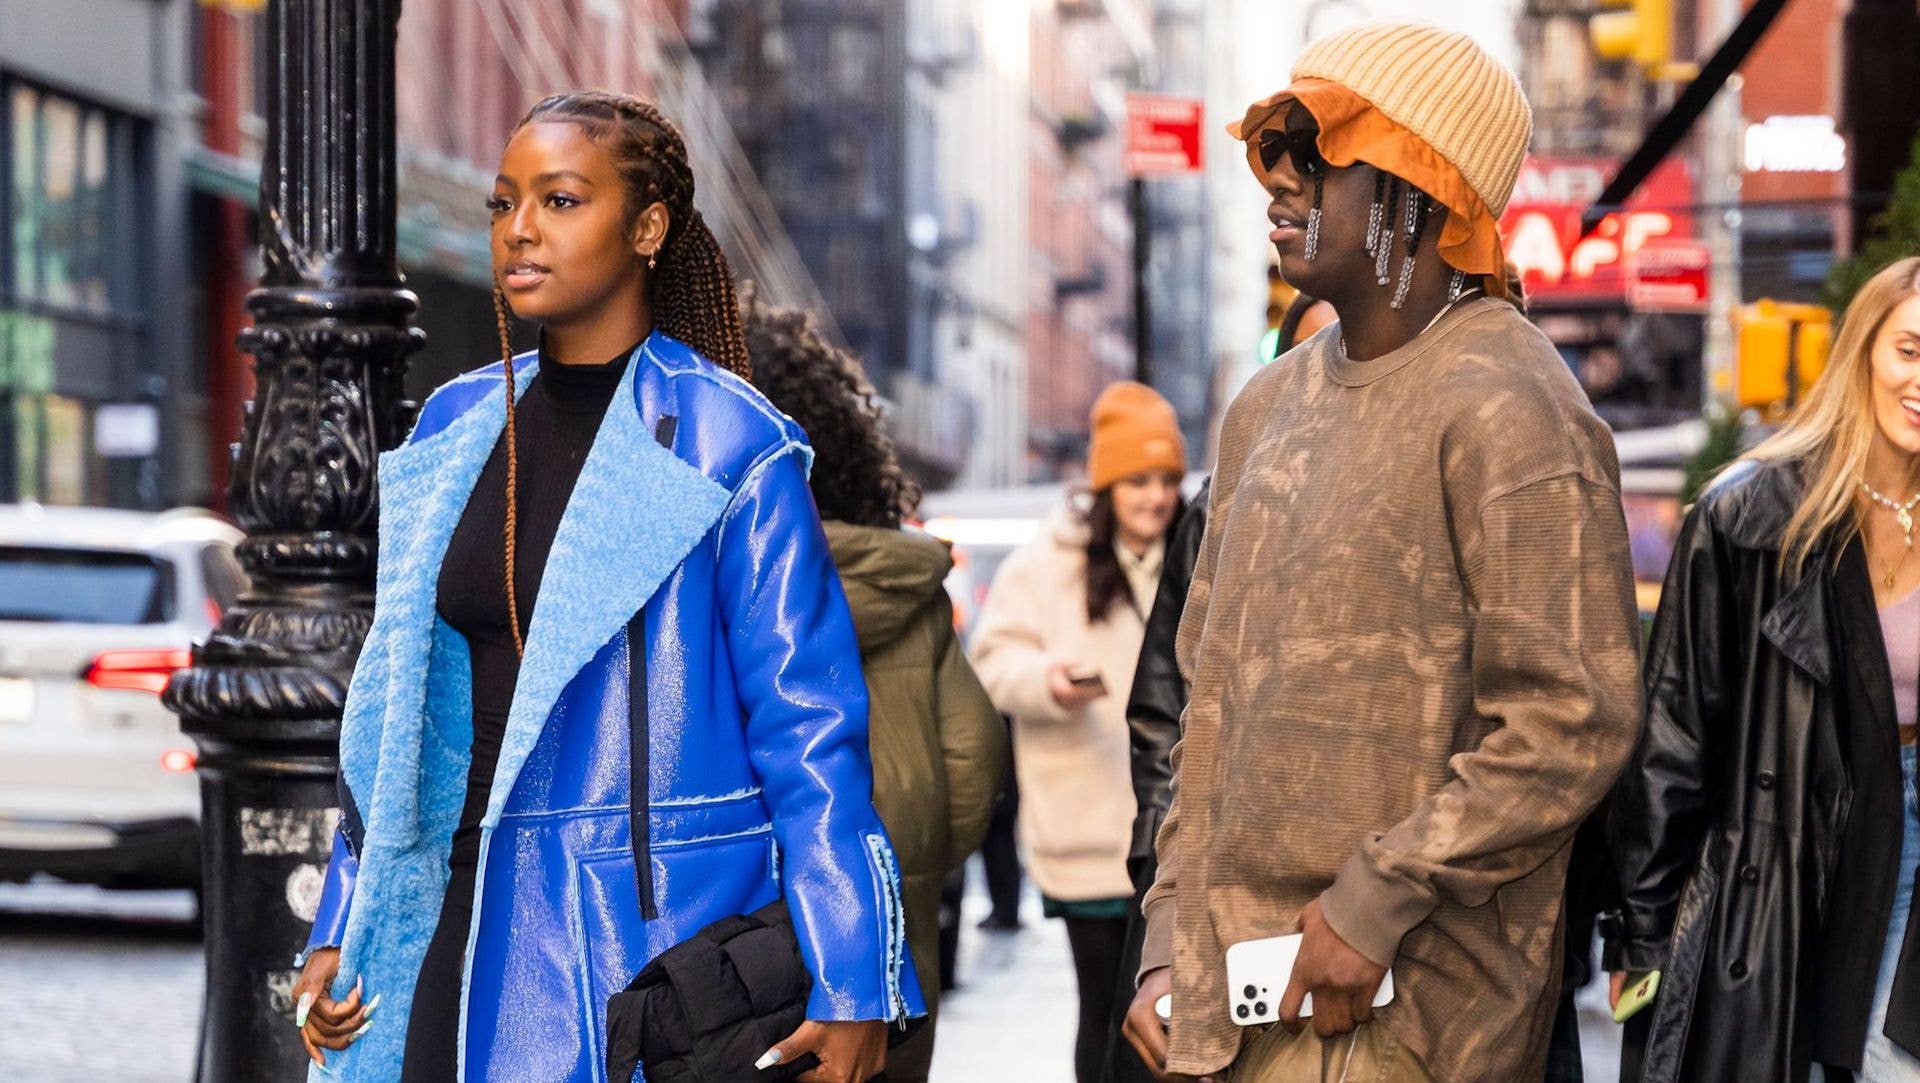 ustine Skye (L) and Lil Yachty are seen in SoHo on January 22, 2022